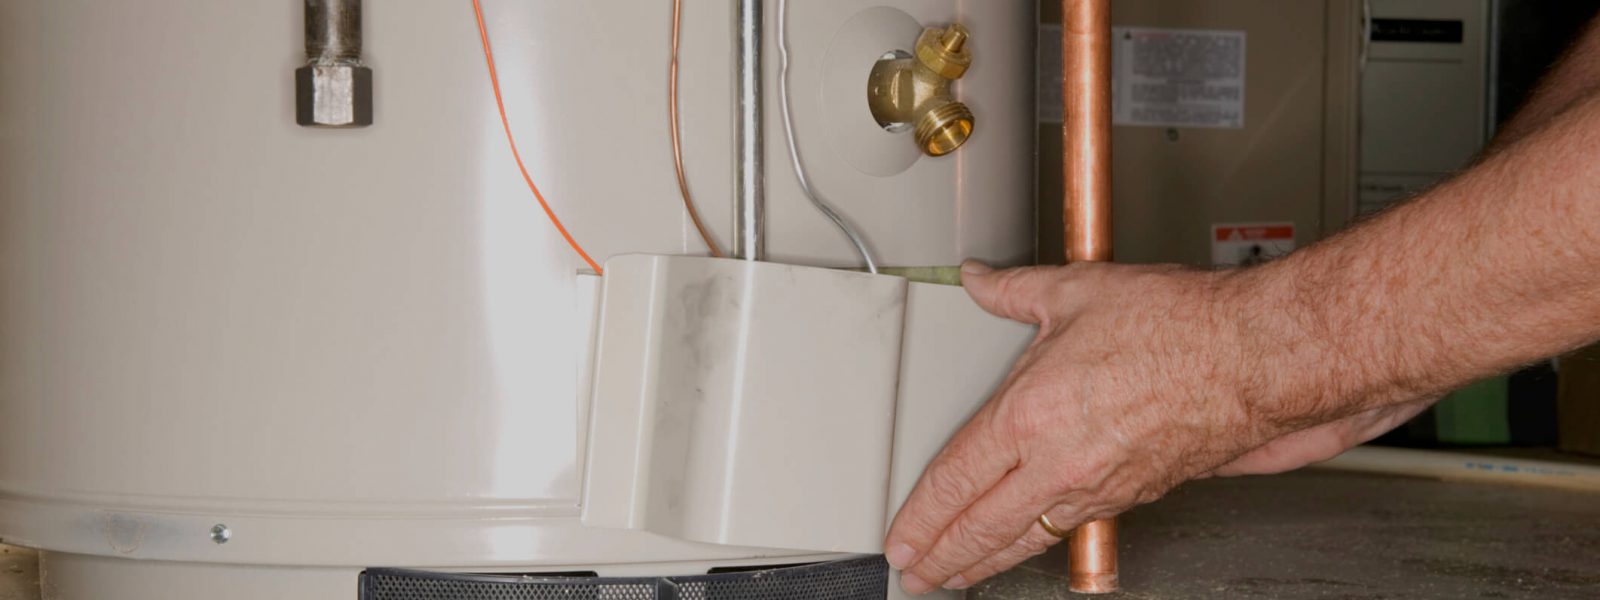 How Does My Water Heater Work? - Jake The Plumber